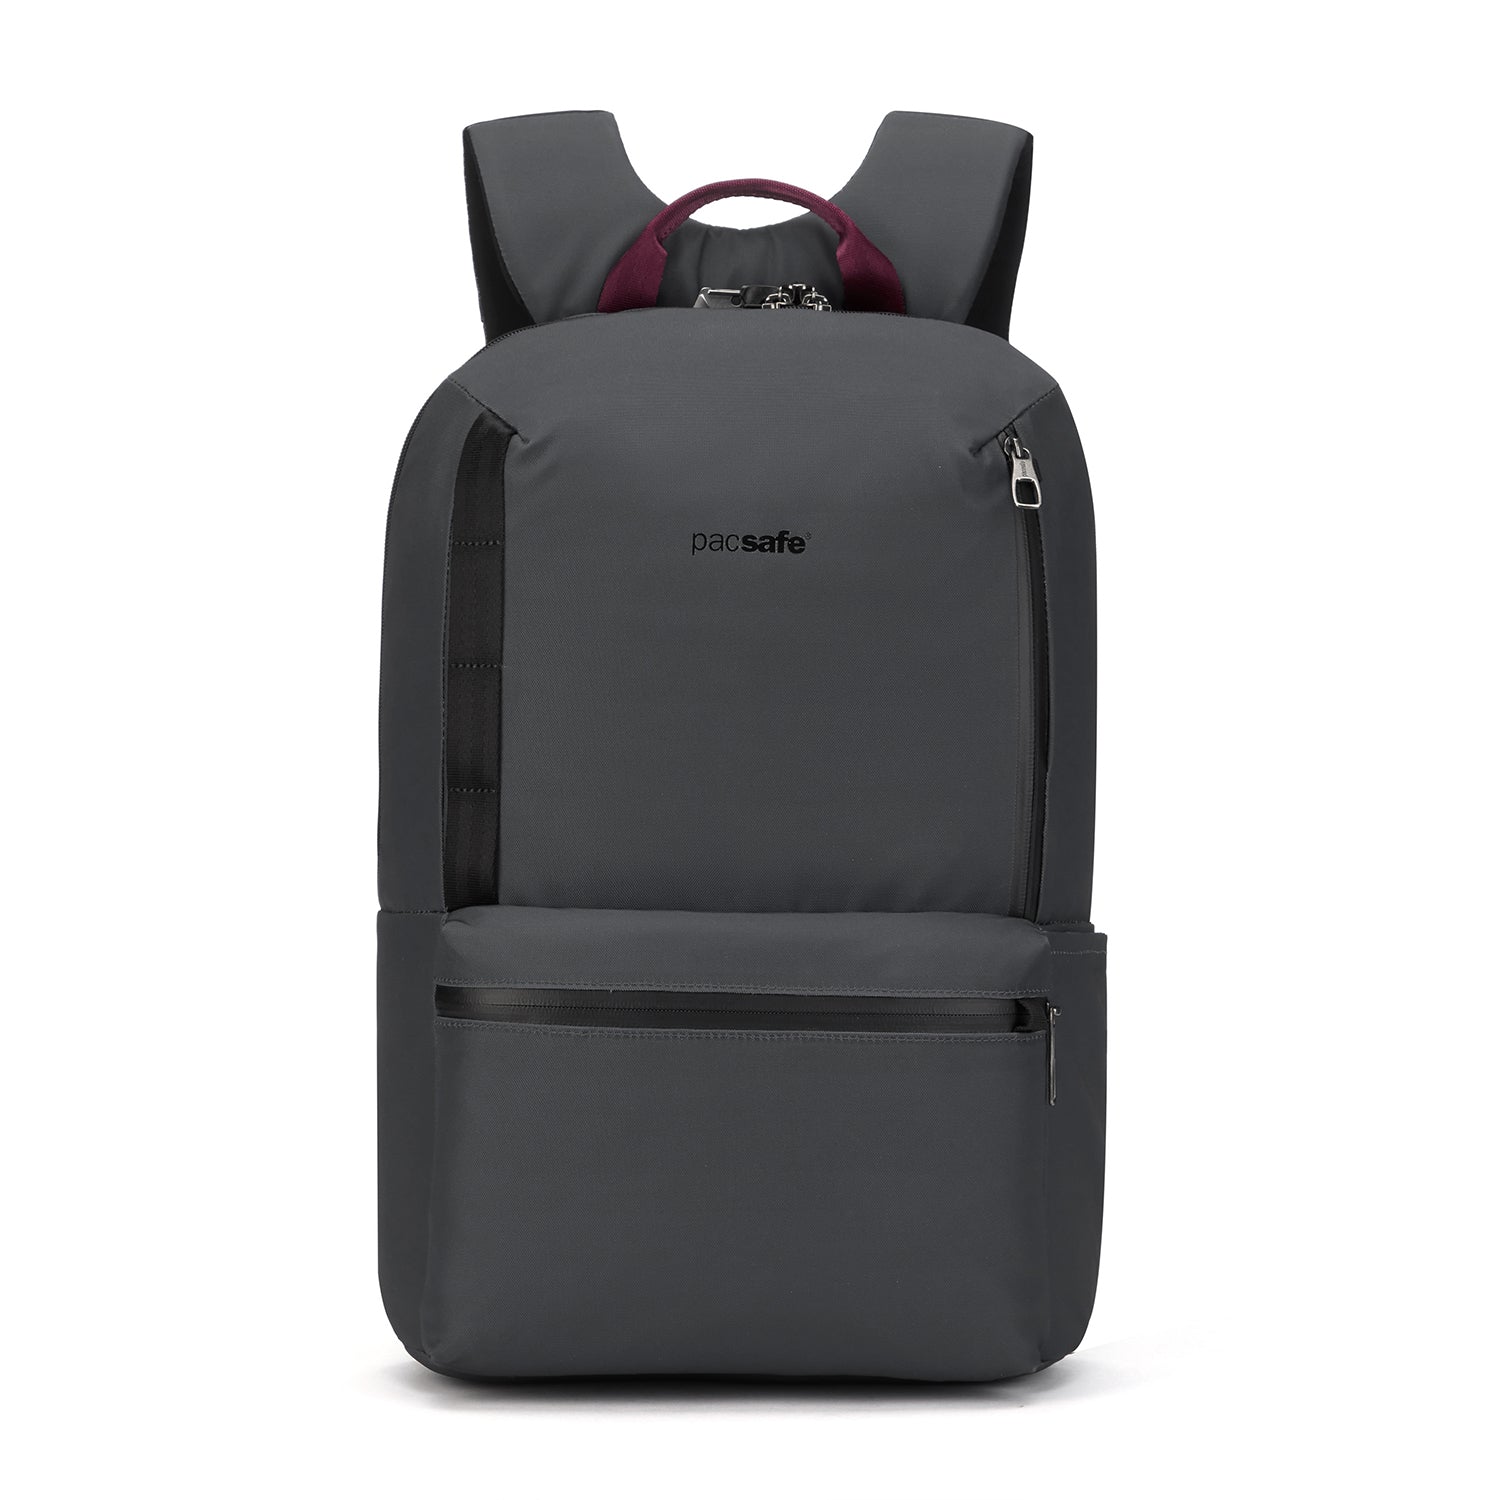 Buy Travel Backpacks Online | With Anti-Theft Features | 5 Year 